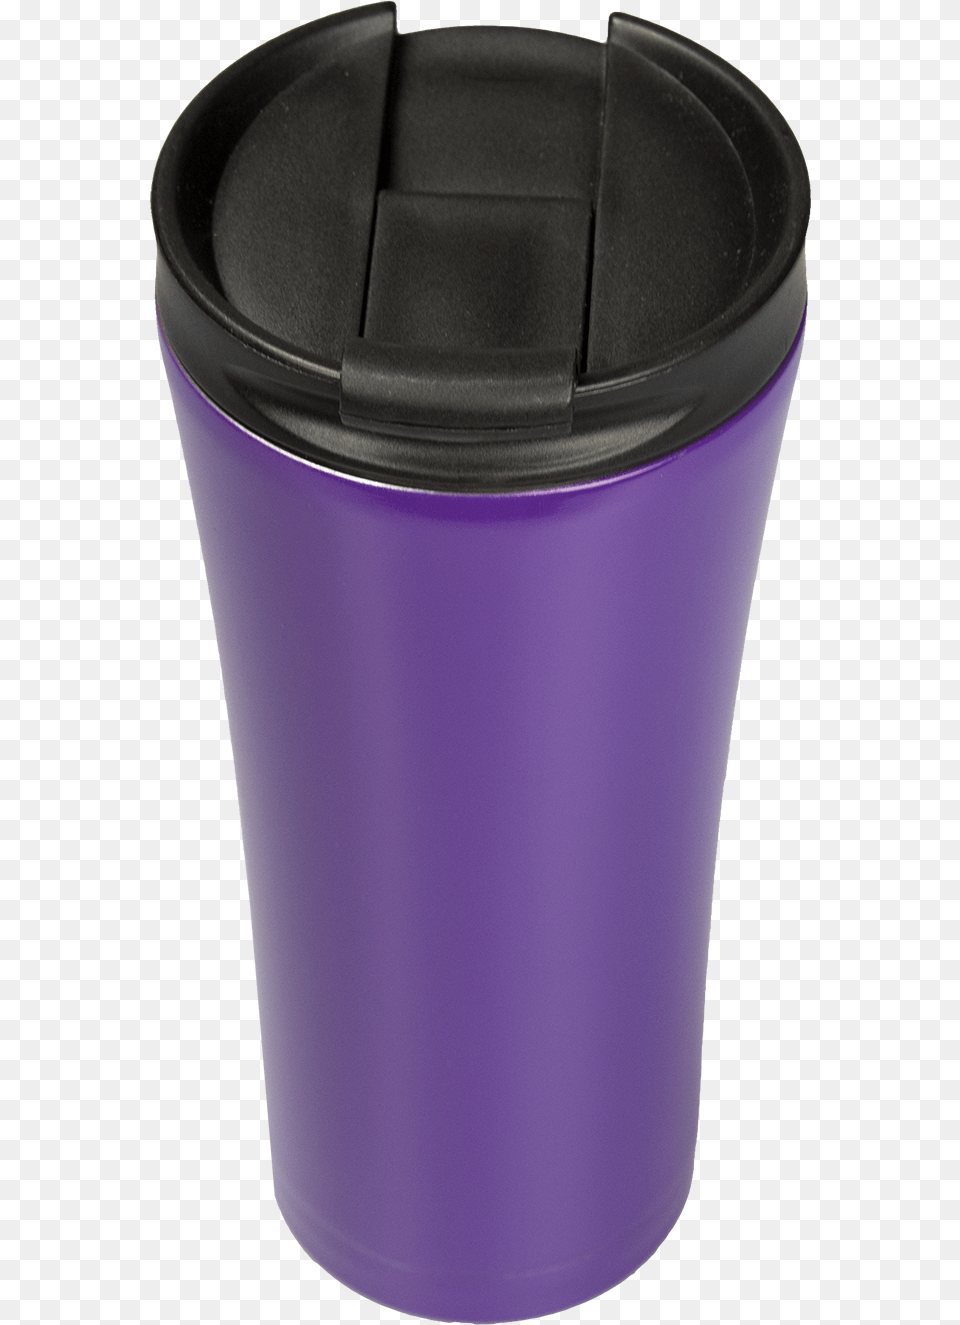 More Java, Tin, Can, Trash Can Png